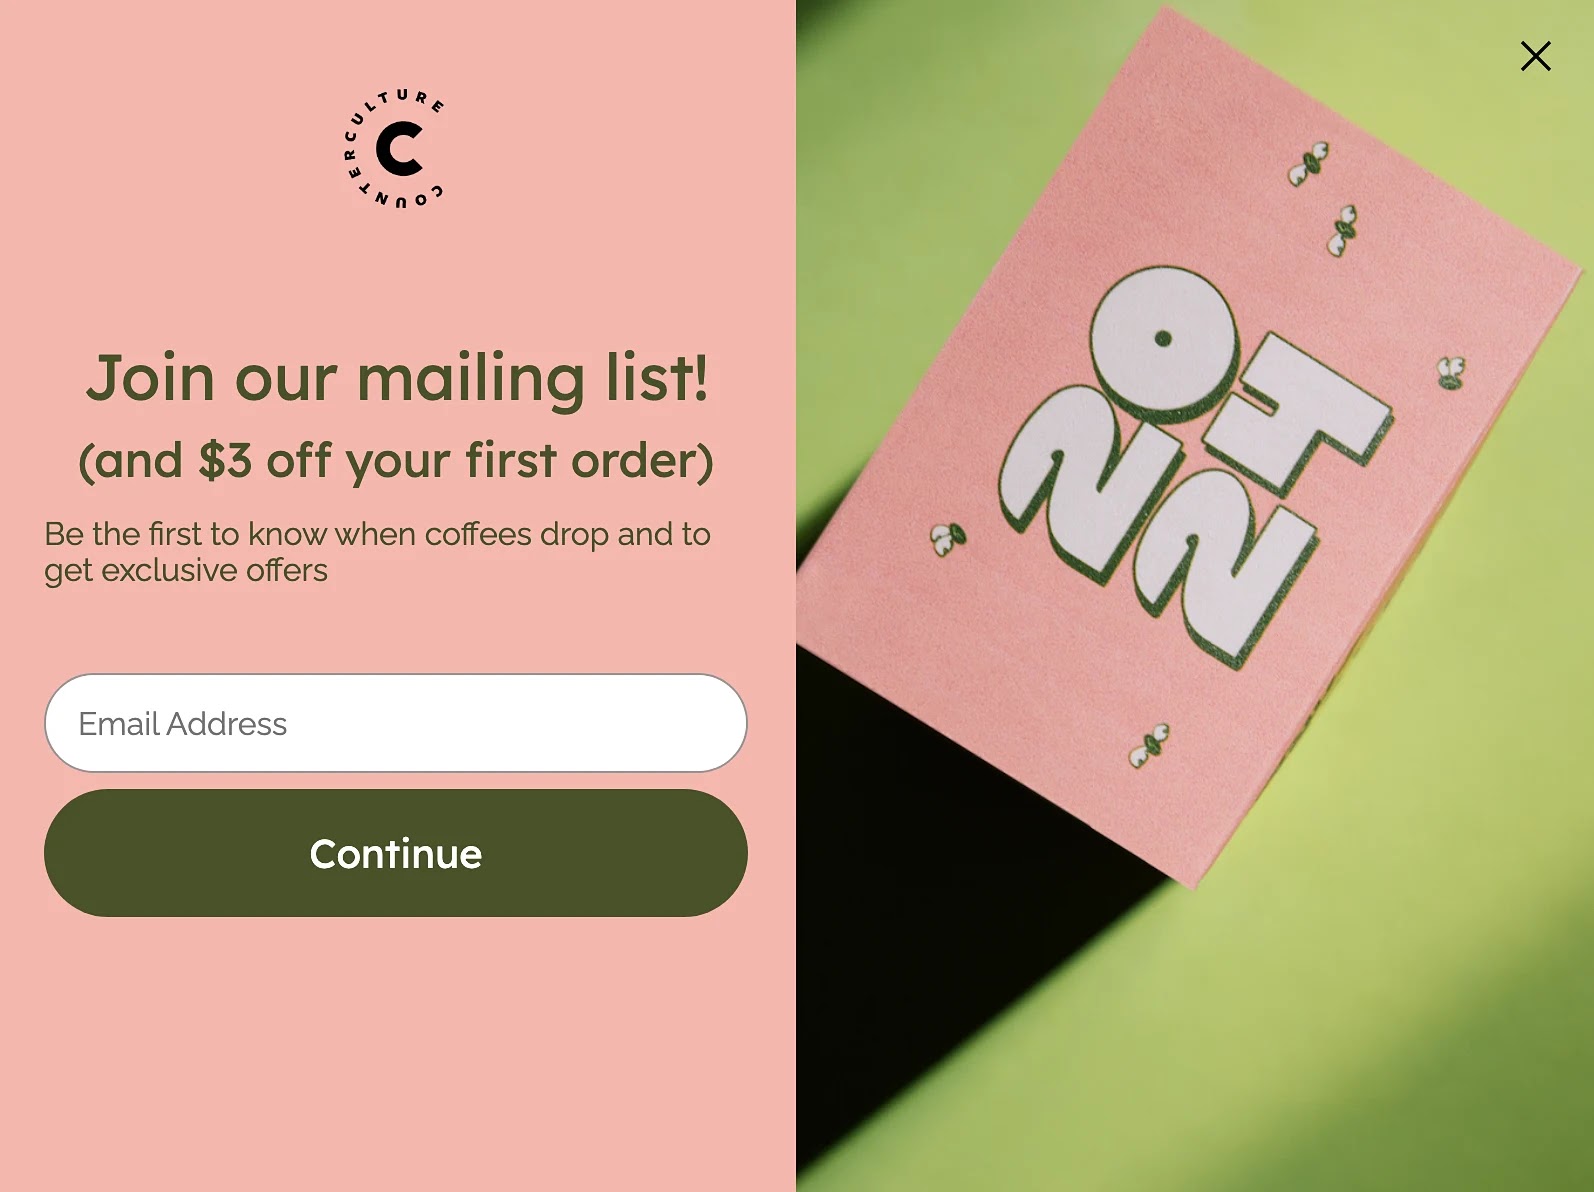 Counter Culture Coffee's discount connection    for caller   email subscribers